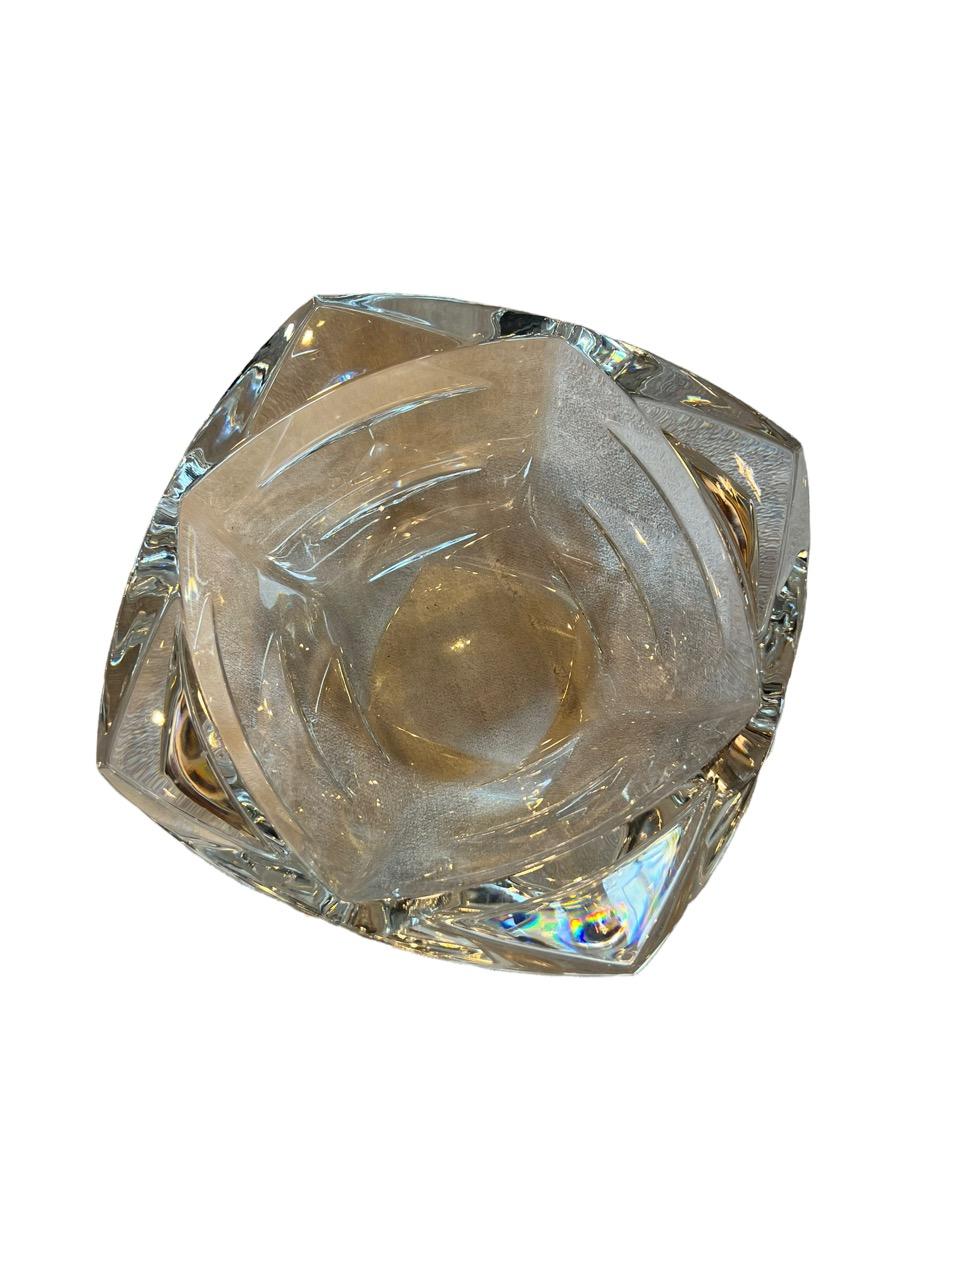 20th Century Baccarat crystal objectif clear small bowl. The bowl changes its shape depending on the angle you are appreciating it from. Triangular cuts that turn into rhombus, with a square shape with round corners.
 